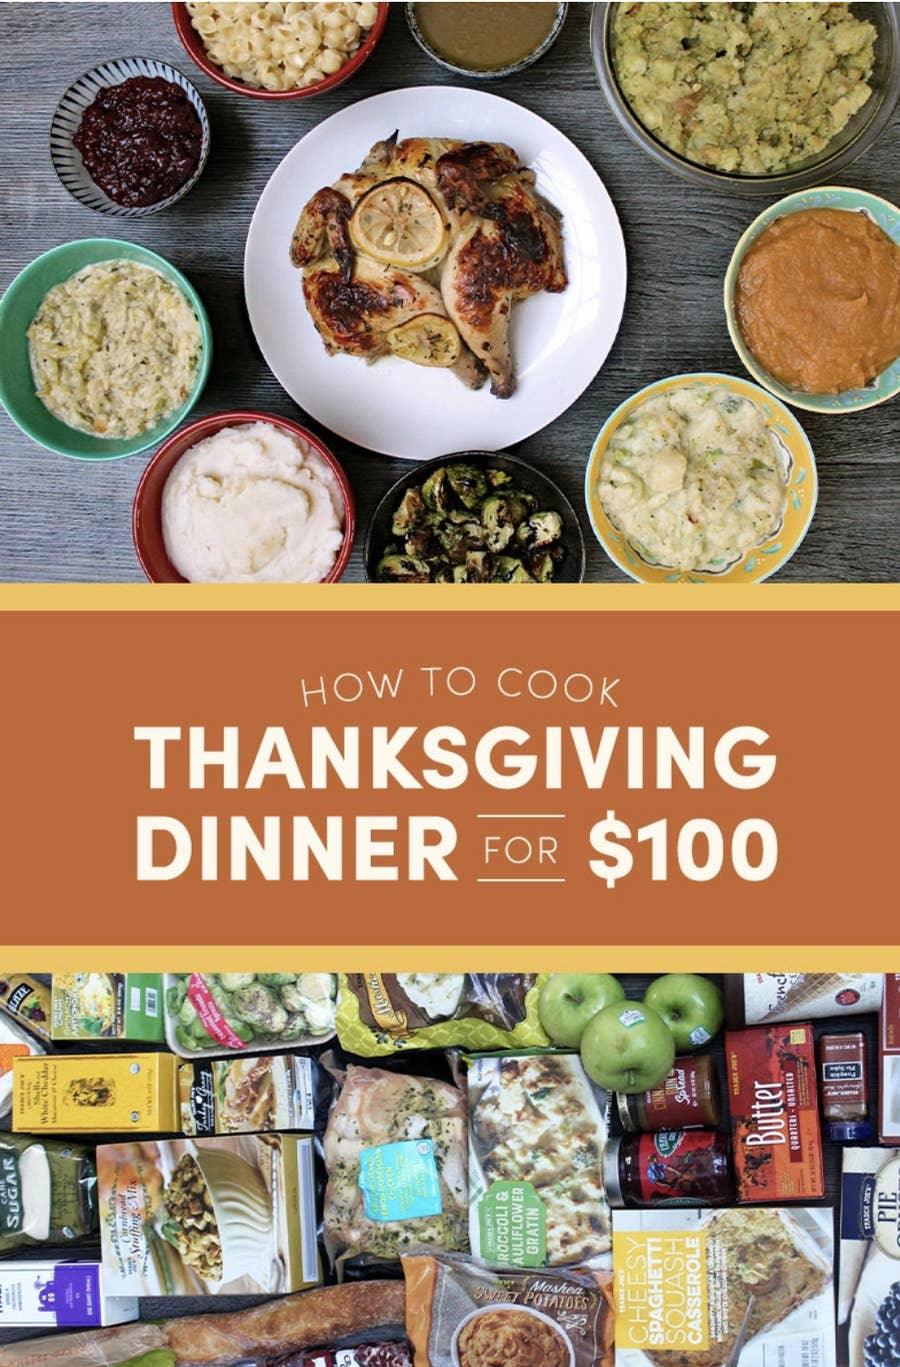 I Made a Downsized Thanksgiving Feast for 2 With Easy Recipes